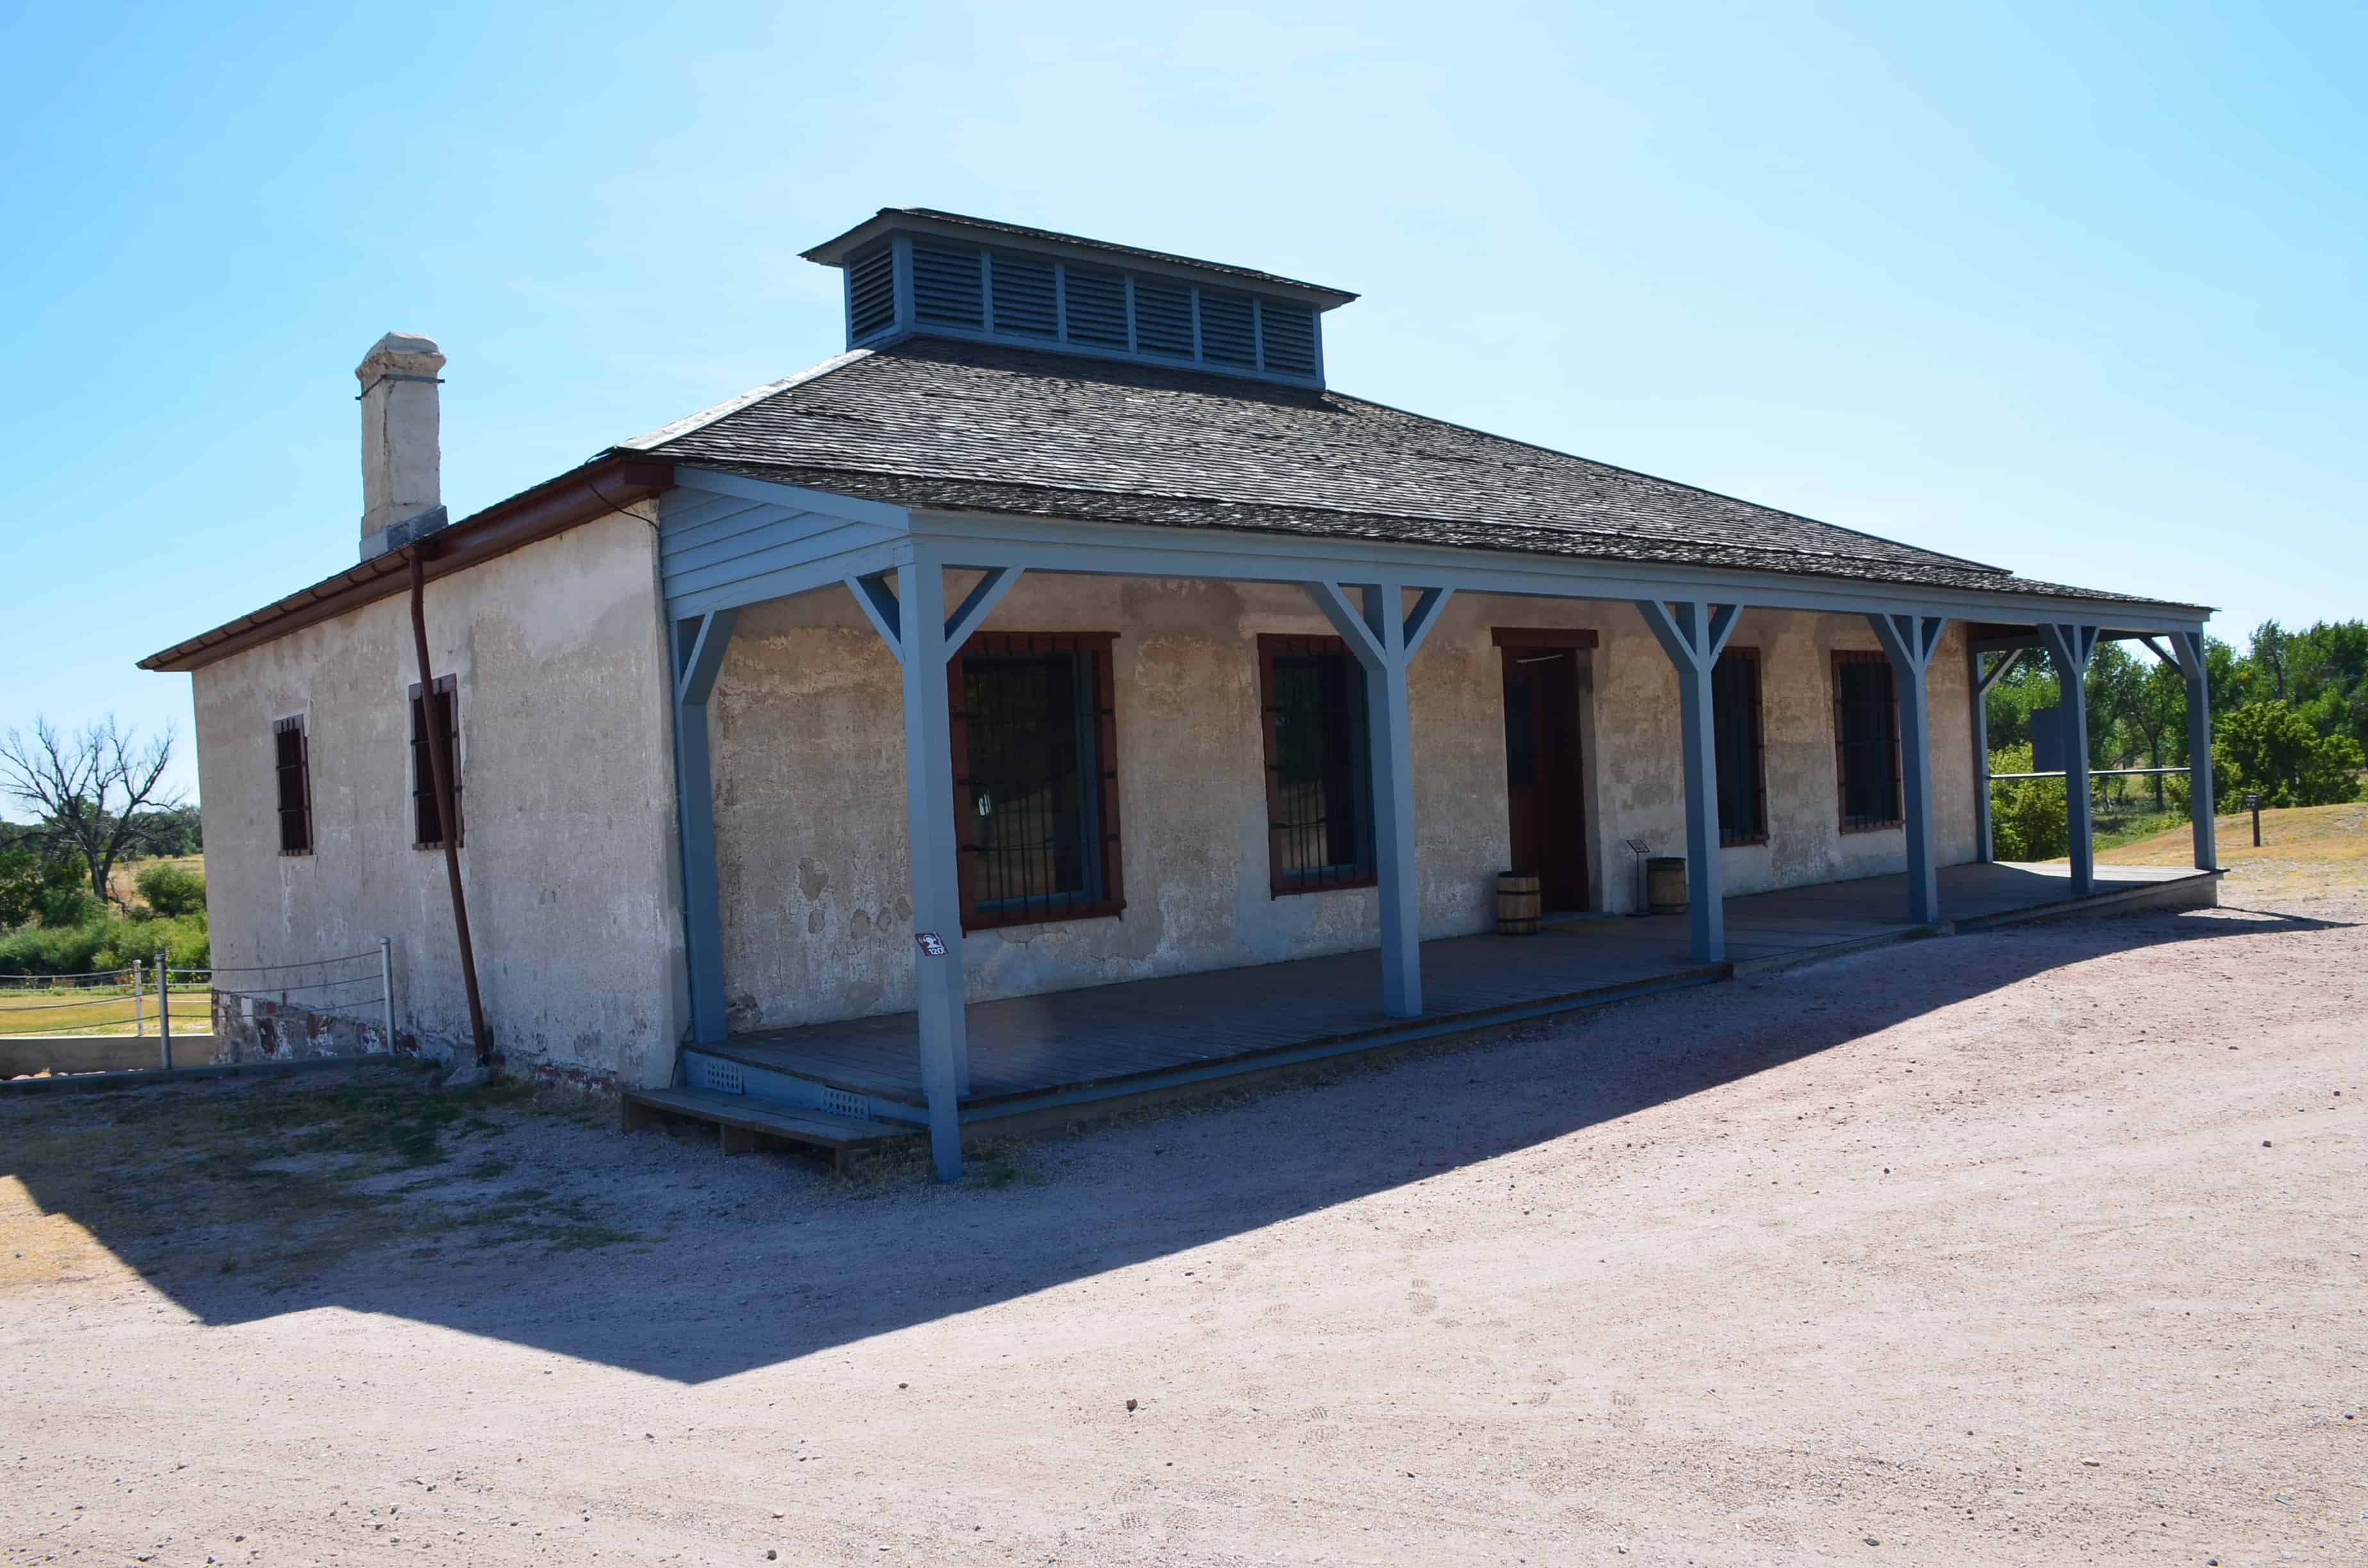 New guardhouse at Fort Laramie National Historic Site in Wyoming